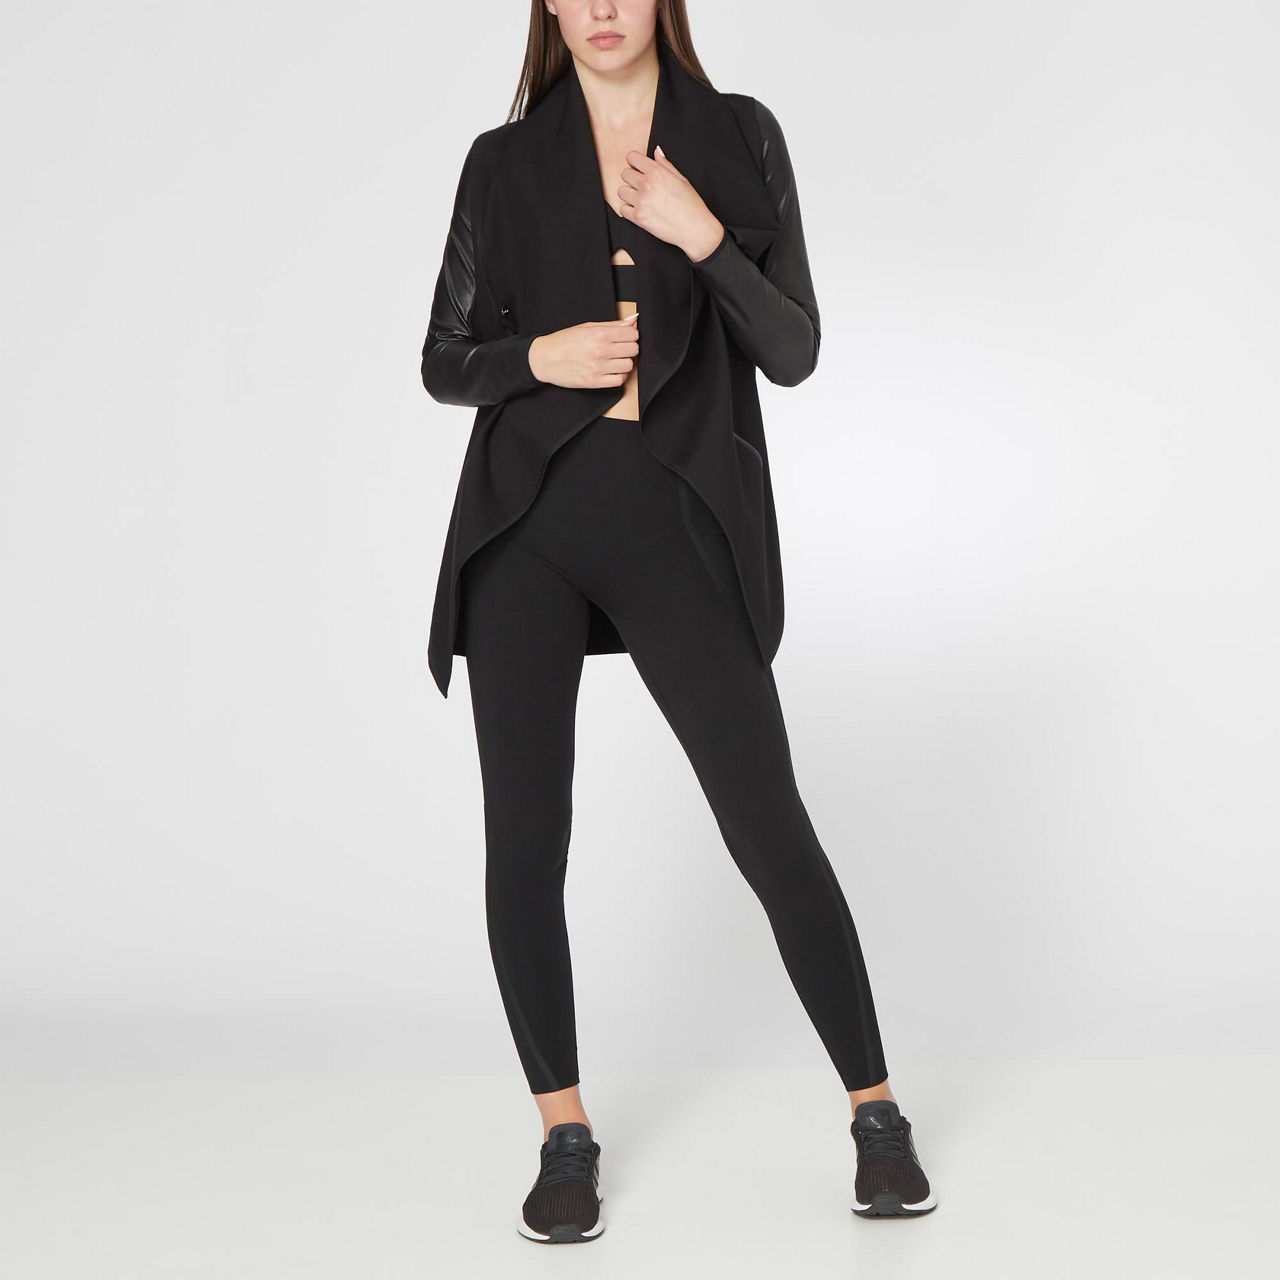 Spanx Drape Front Jacket Black - $100 (44% Off Retail) - From